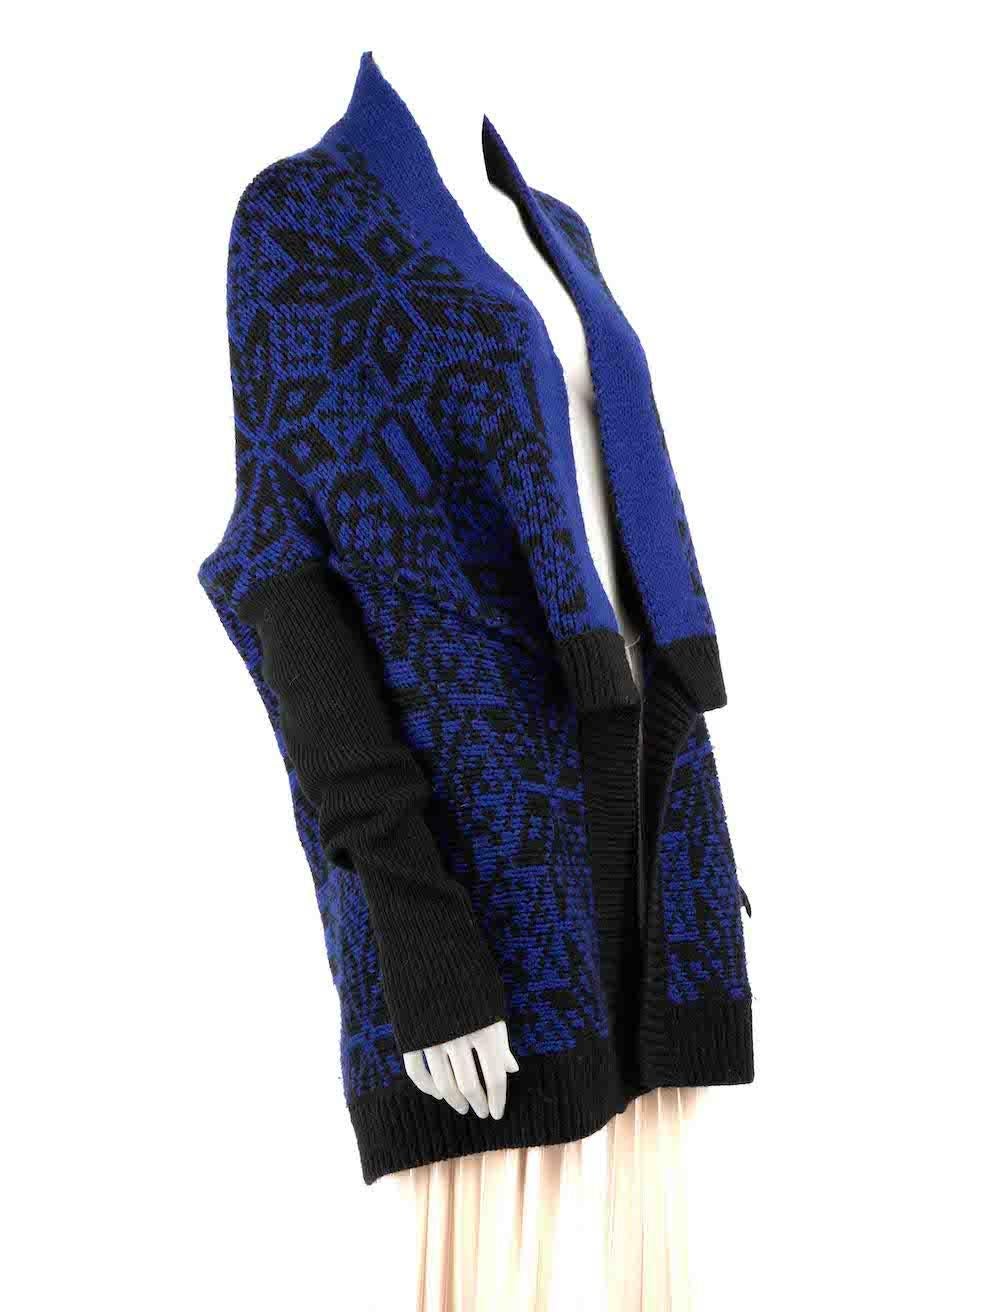 CONDITION is Good. Minor wear to cardigan is evident. Light wear to the right-side with a pluck to the knit on this used Maje designer resale item.
 
 
 
 Details
 
 
 Blue
 
 Synthetic
 
 Cardigan
 
 Chunky knitted
 
 Open front
 
 Fair Isle